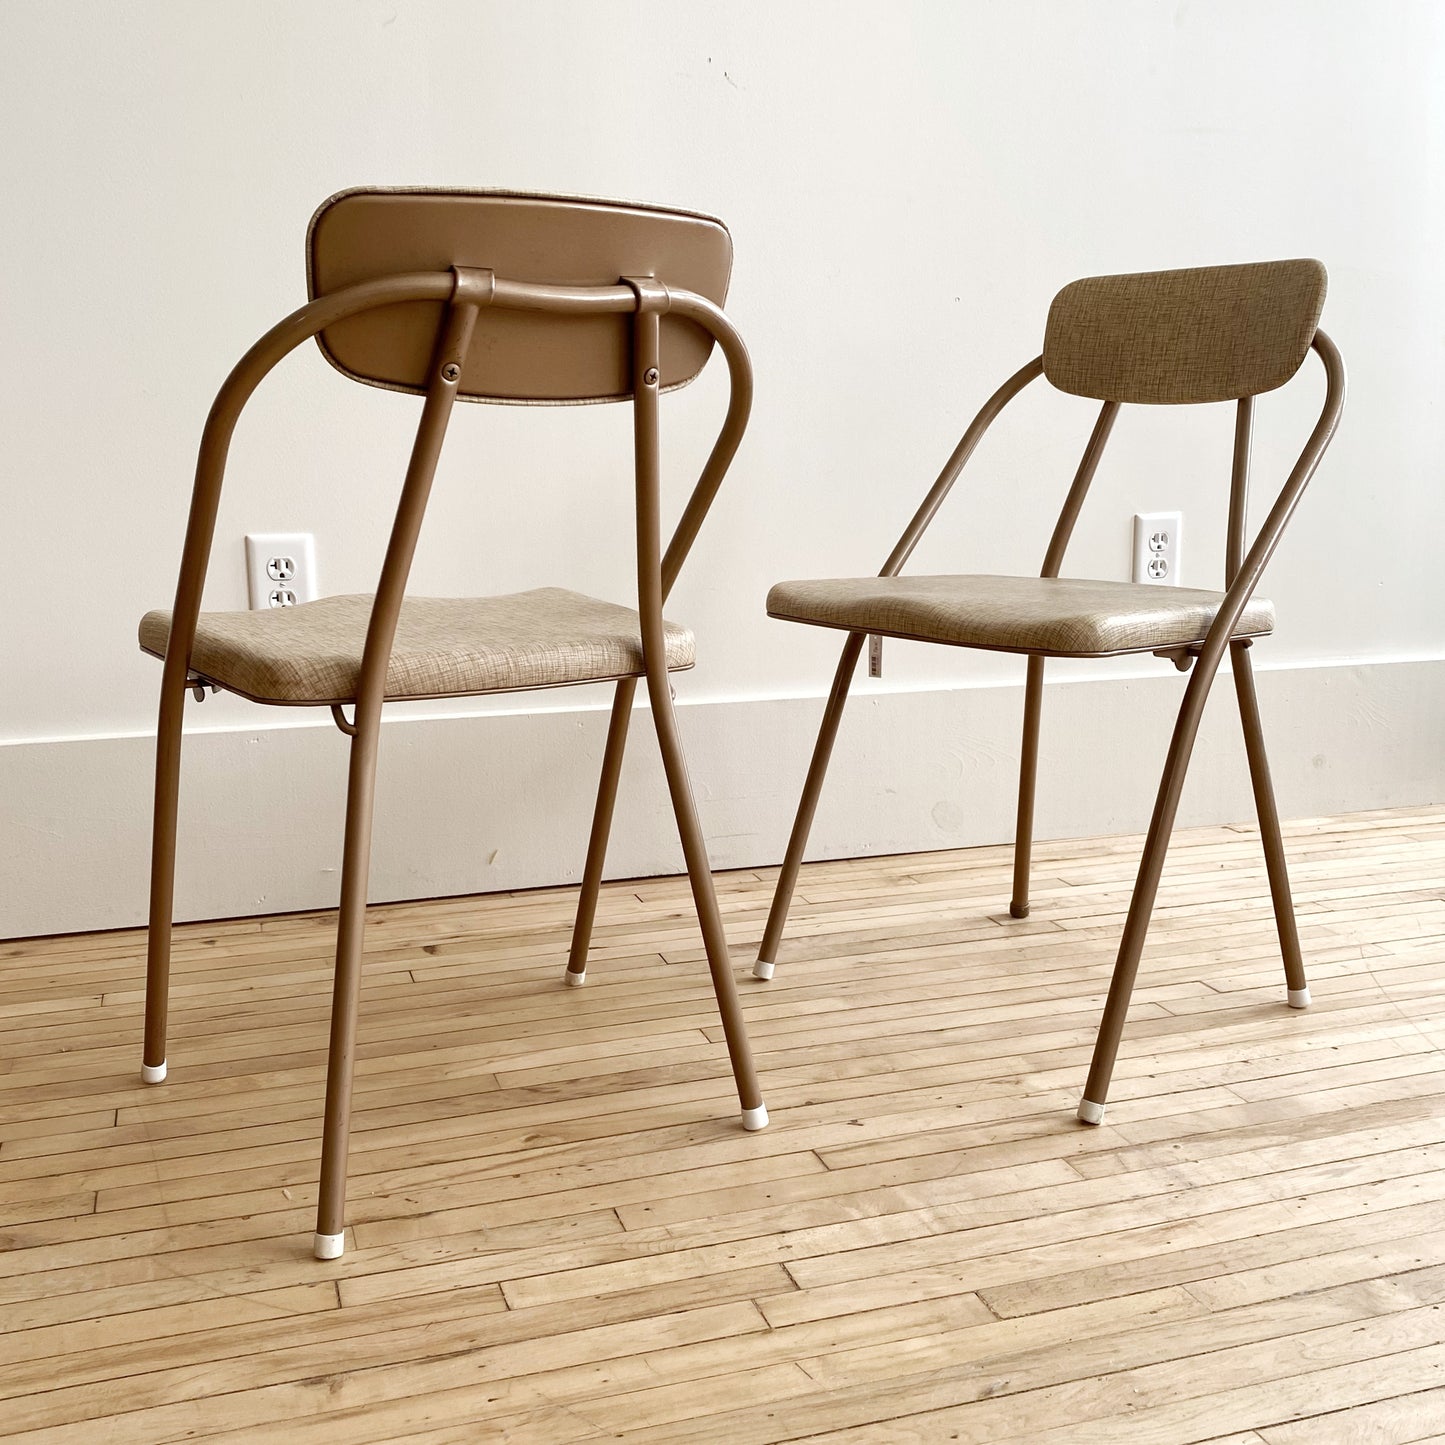 Pair of Vintage Mid-century Folding Chairs